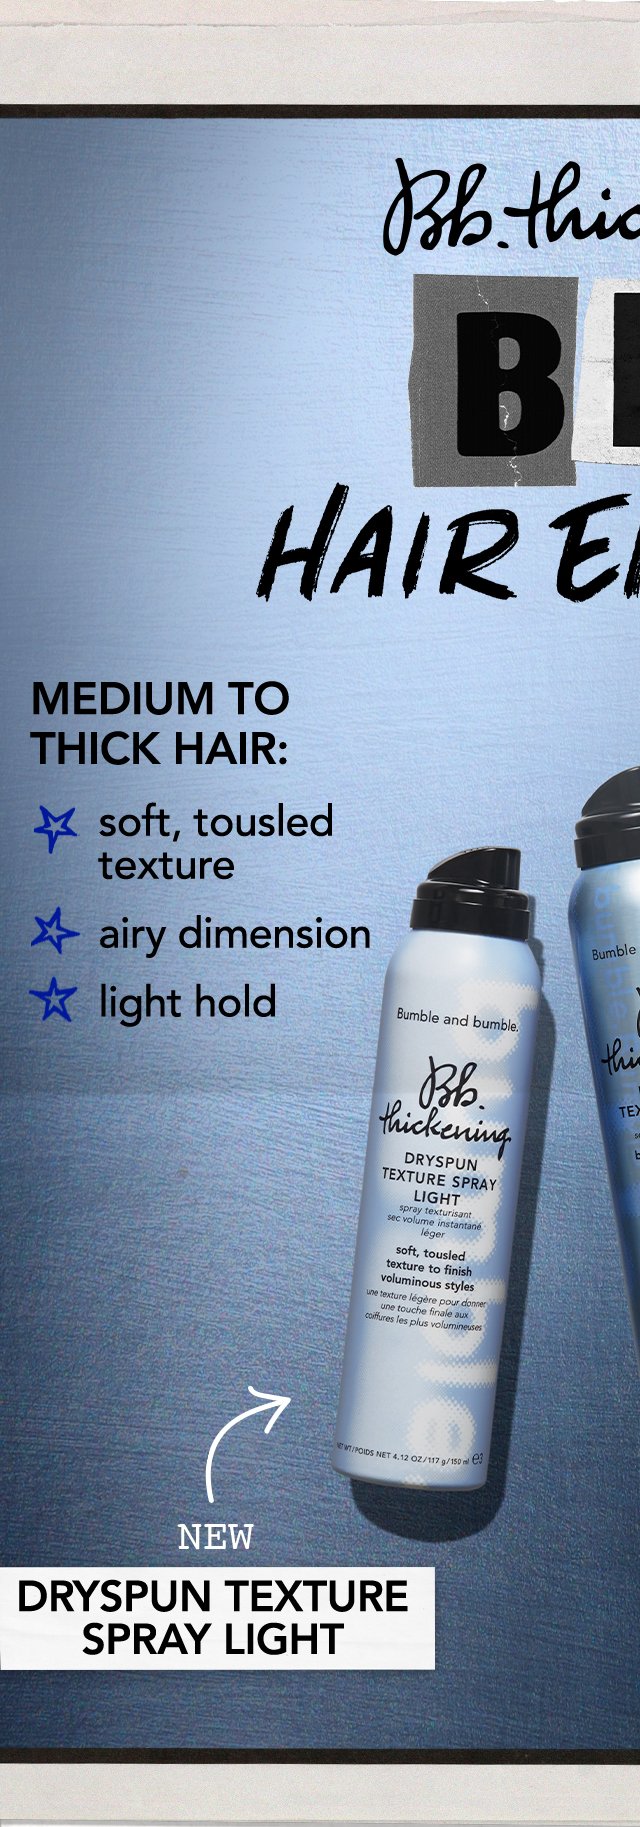 Bb.thickening BIG HAIR ENERGY | MEDIUM TO THICK HAIR: soft, tousled texture | airy dimension | light hold | NEW DRYSPUN TEXTURE SPRAY LIGHT